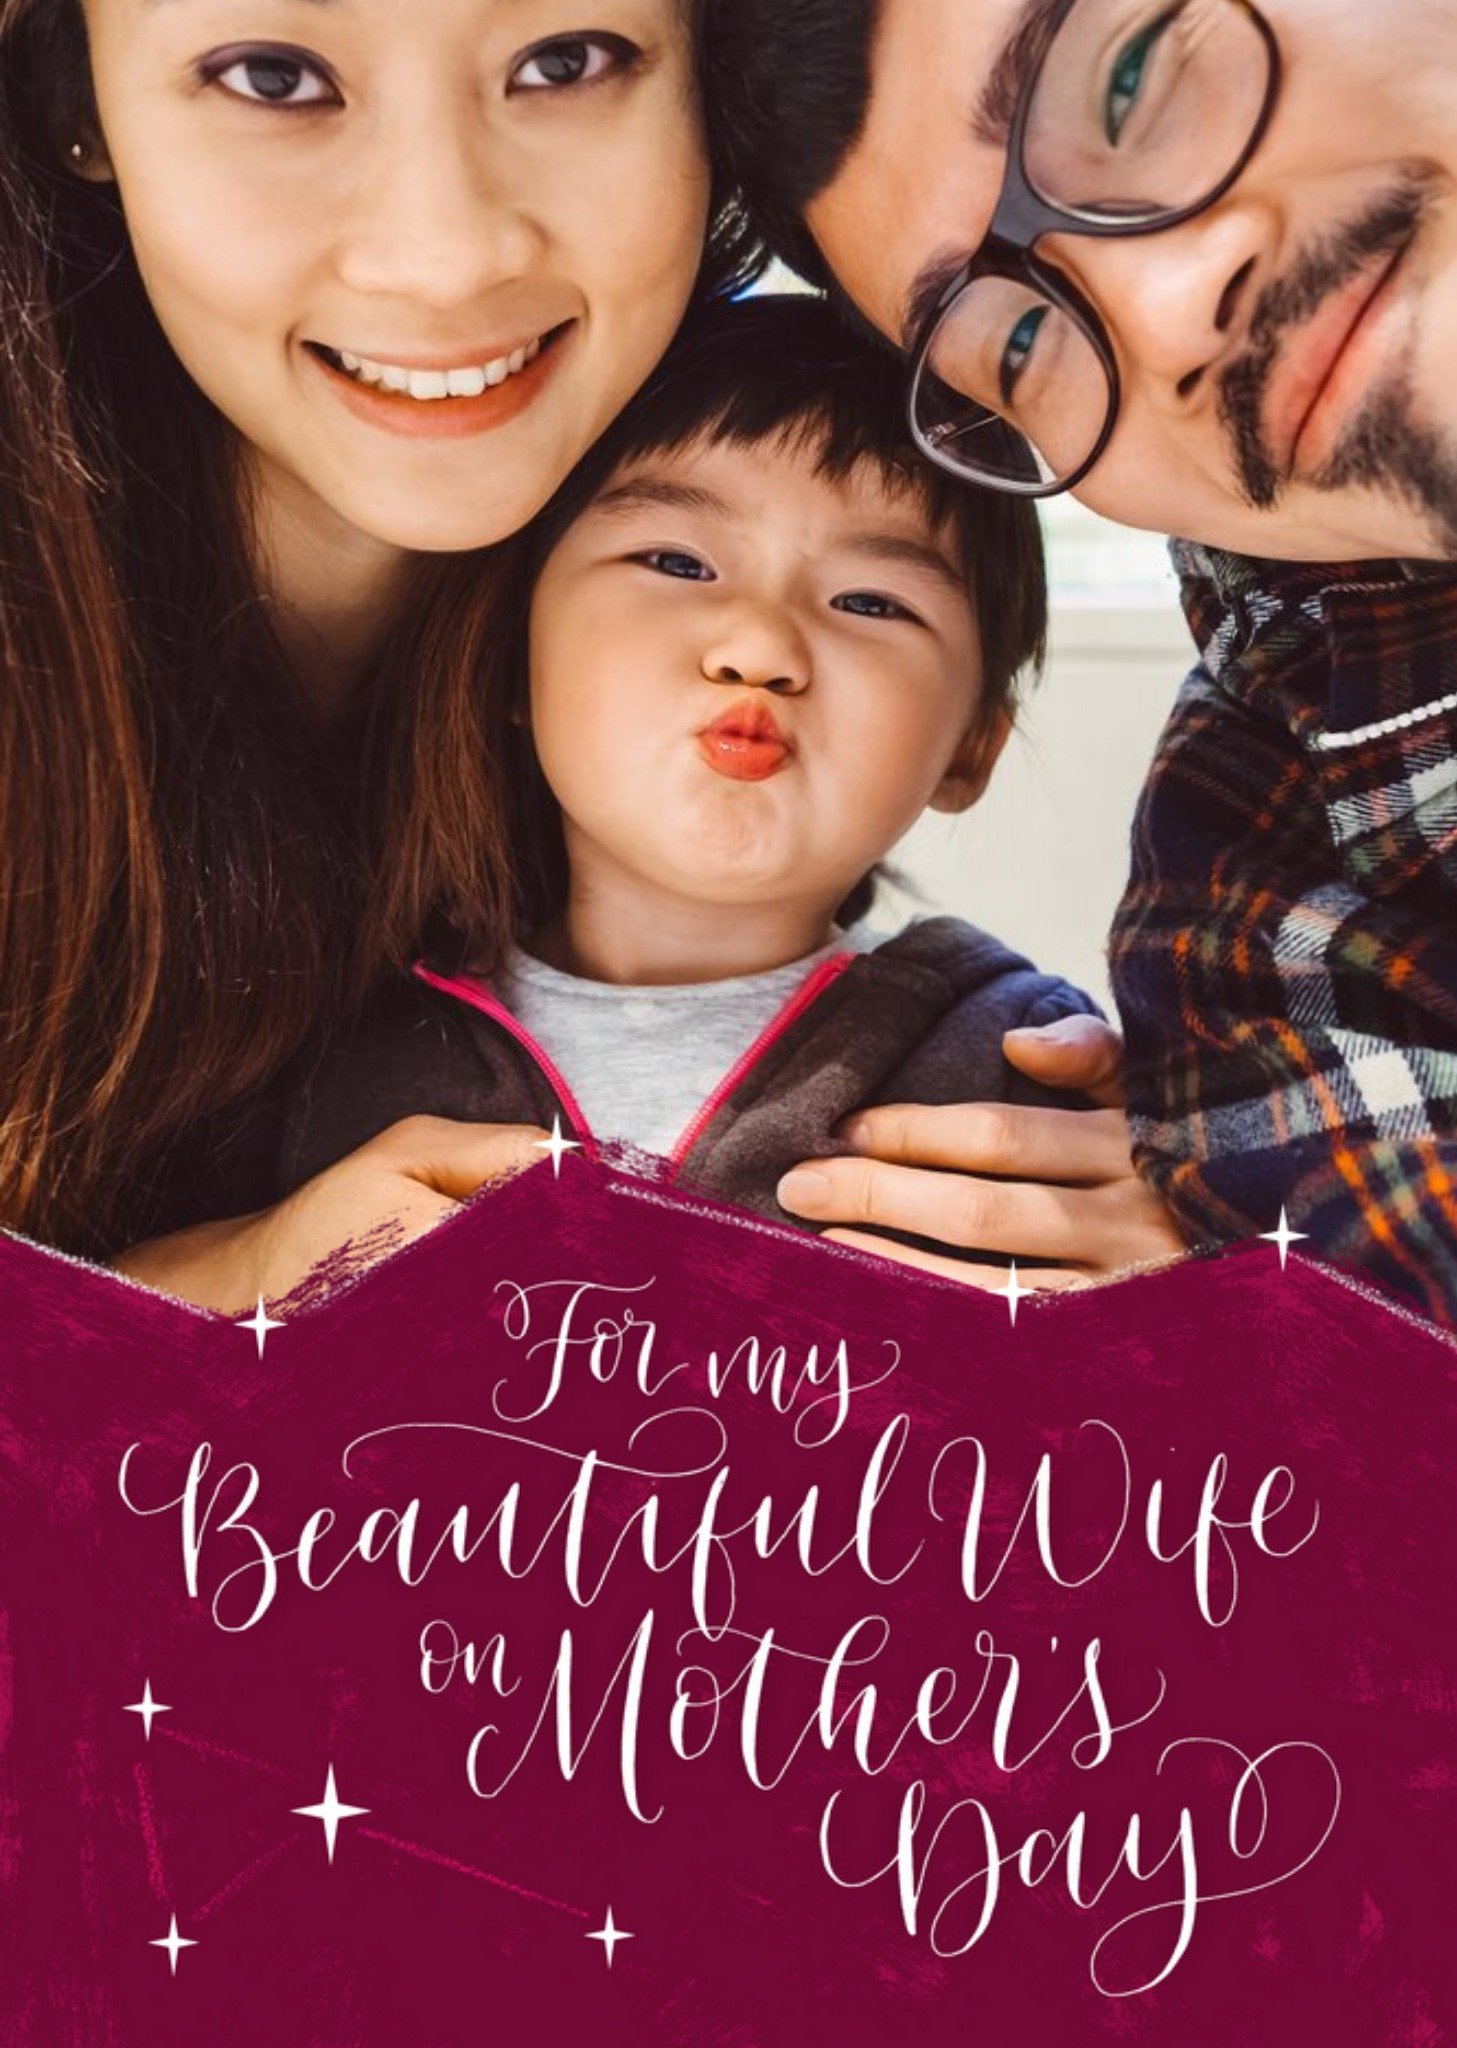 Moonpig Mother's Day Card - Beautiful Wife On Mother's Day - Photo Upload Card - Calligraphy, Large